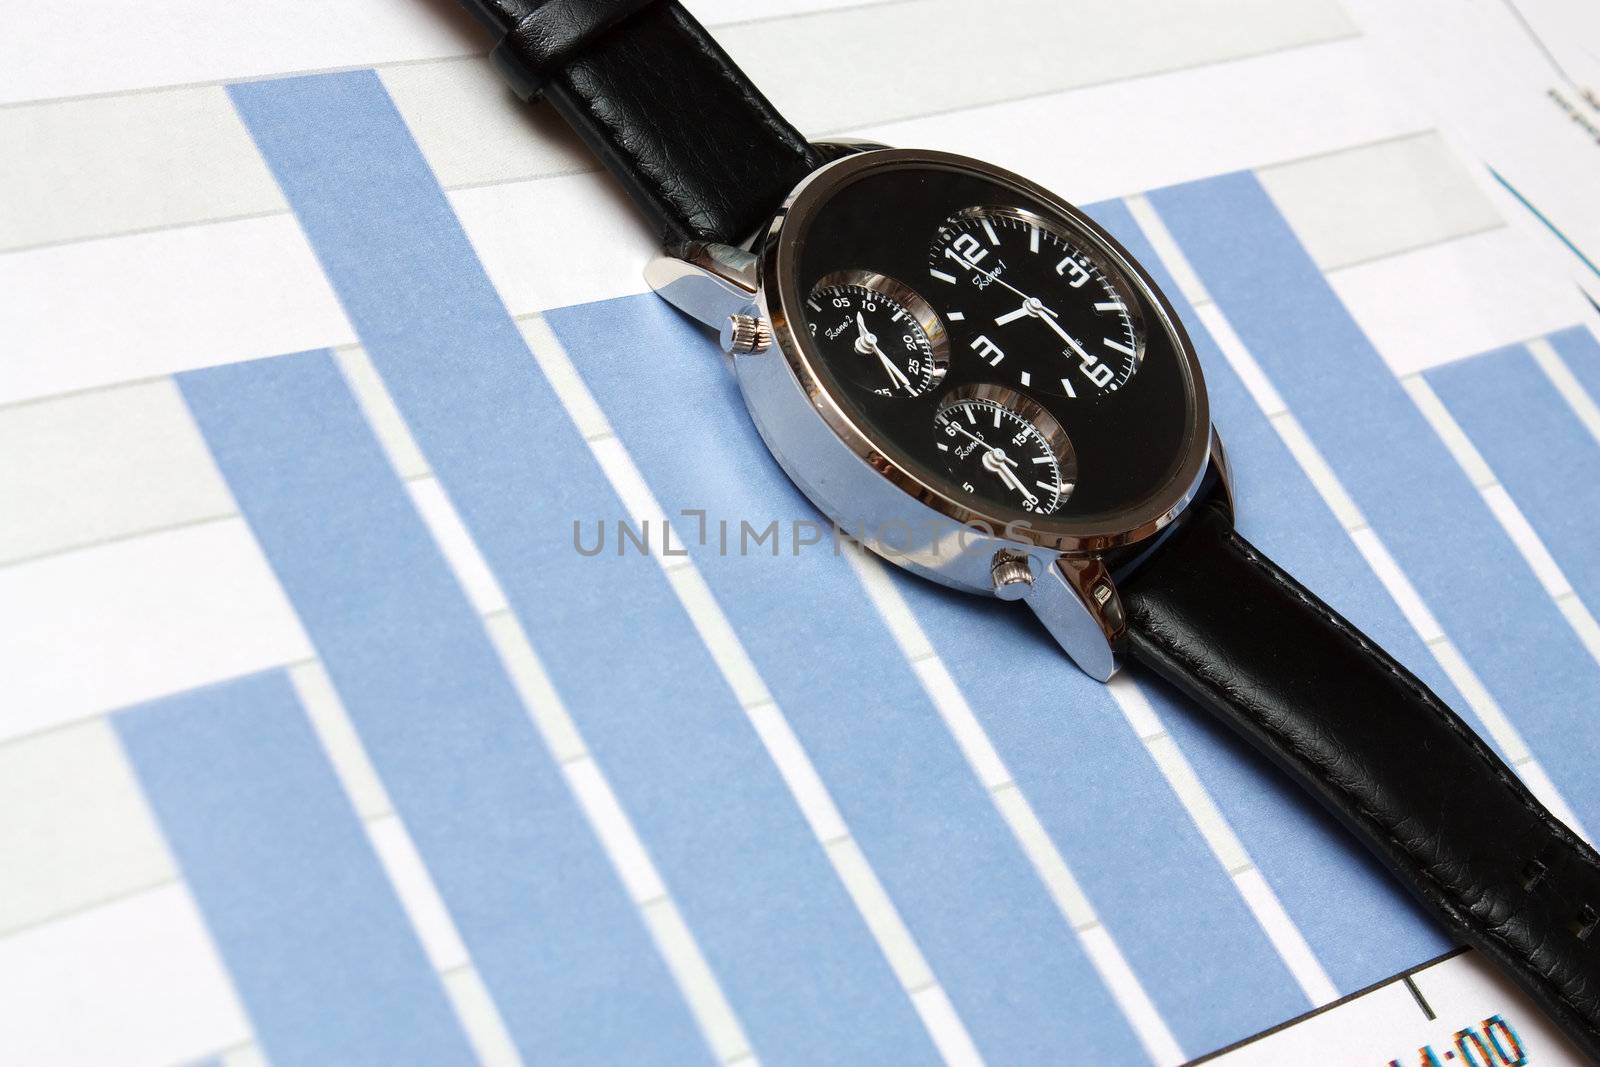 The blue diagram and watch